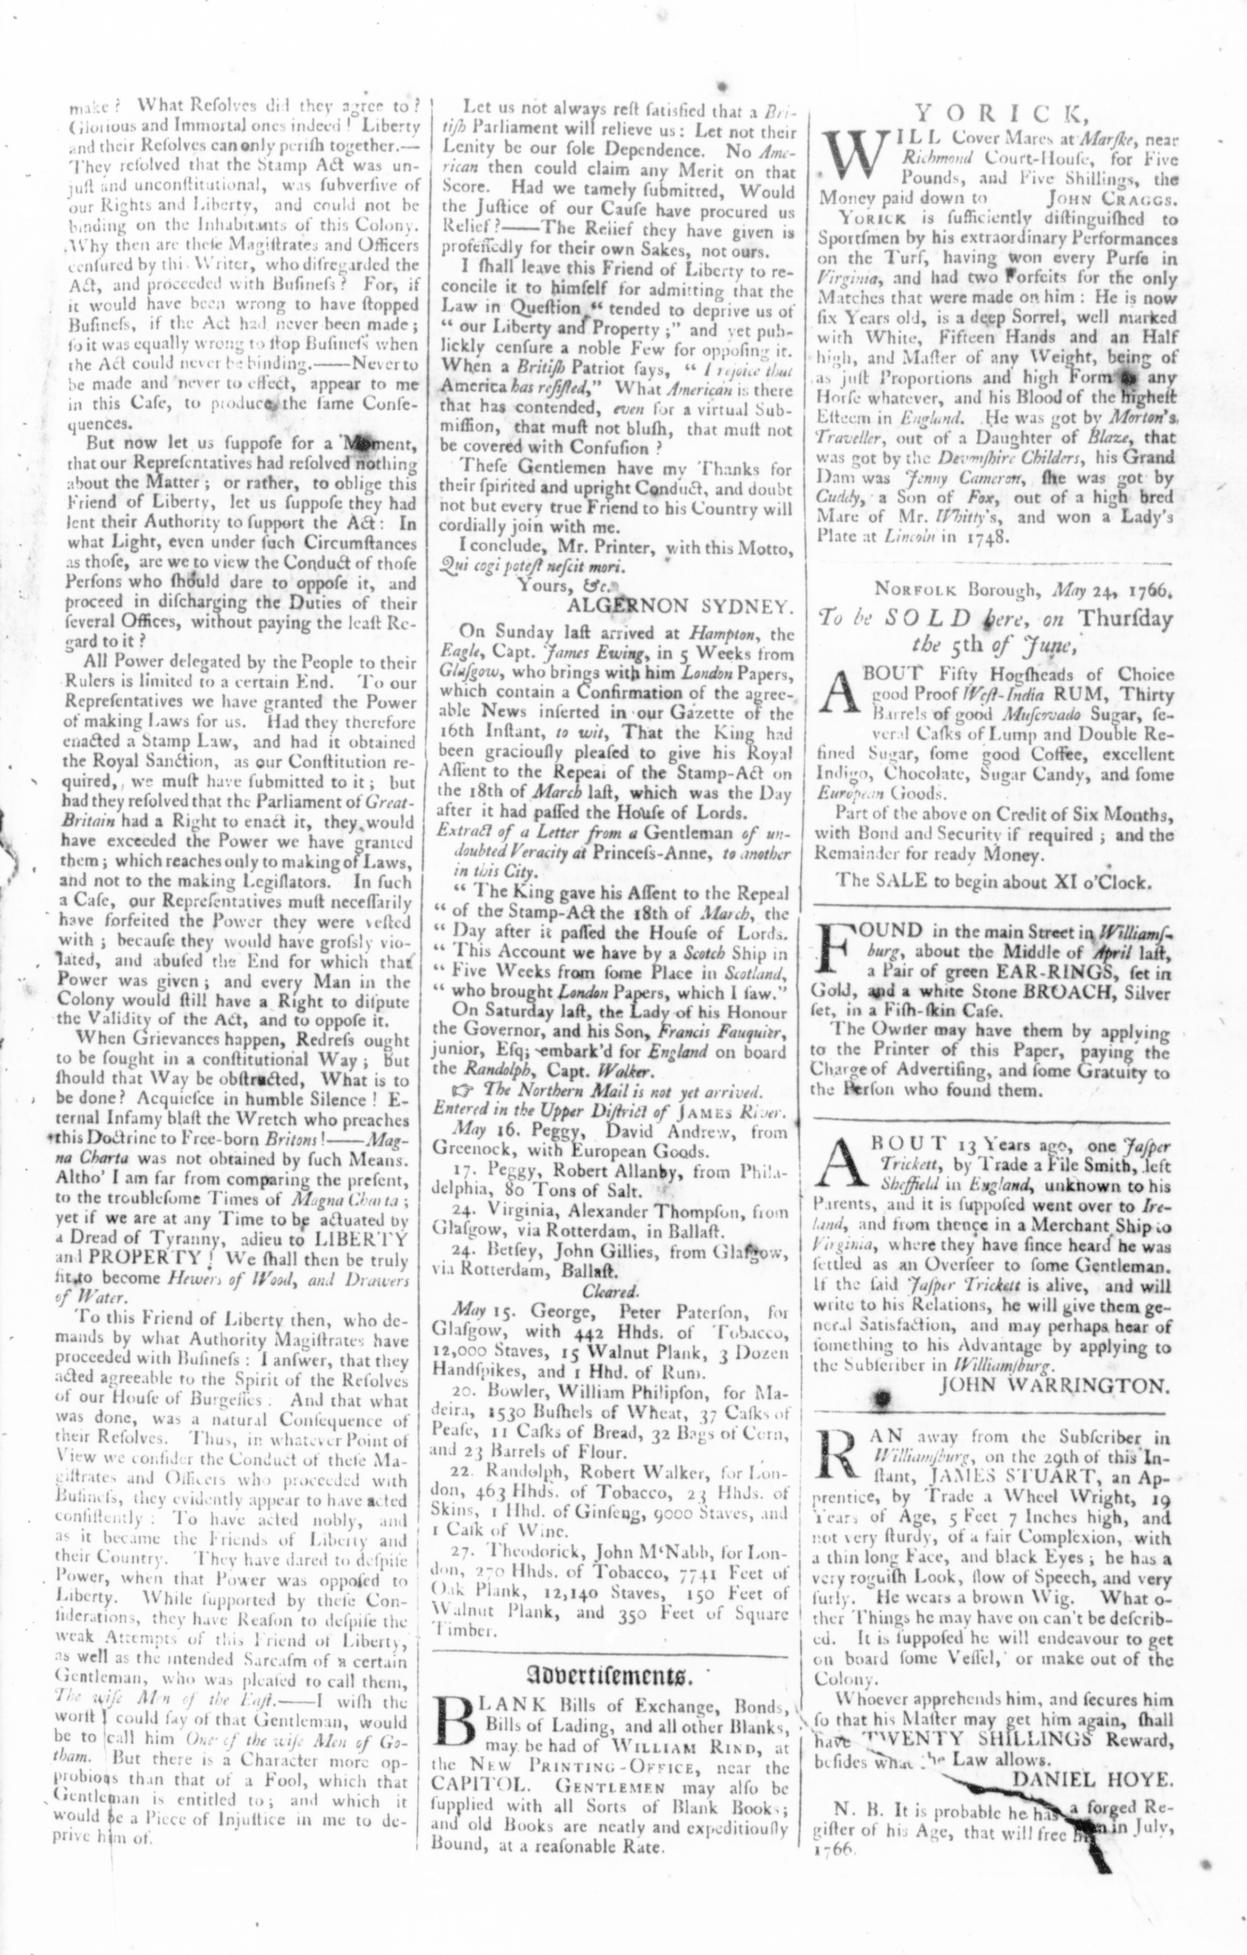 May 31 - 5:30:1766 Rind's Virginia Gazette 3rd page